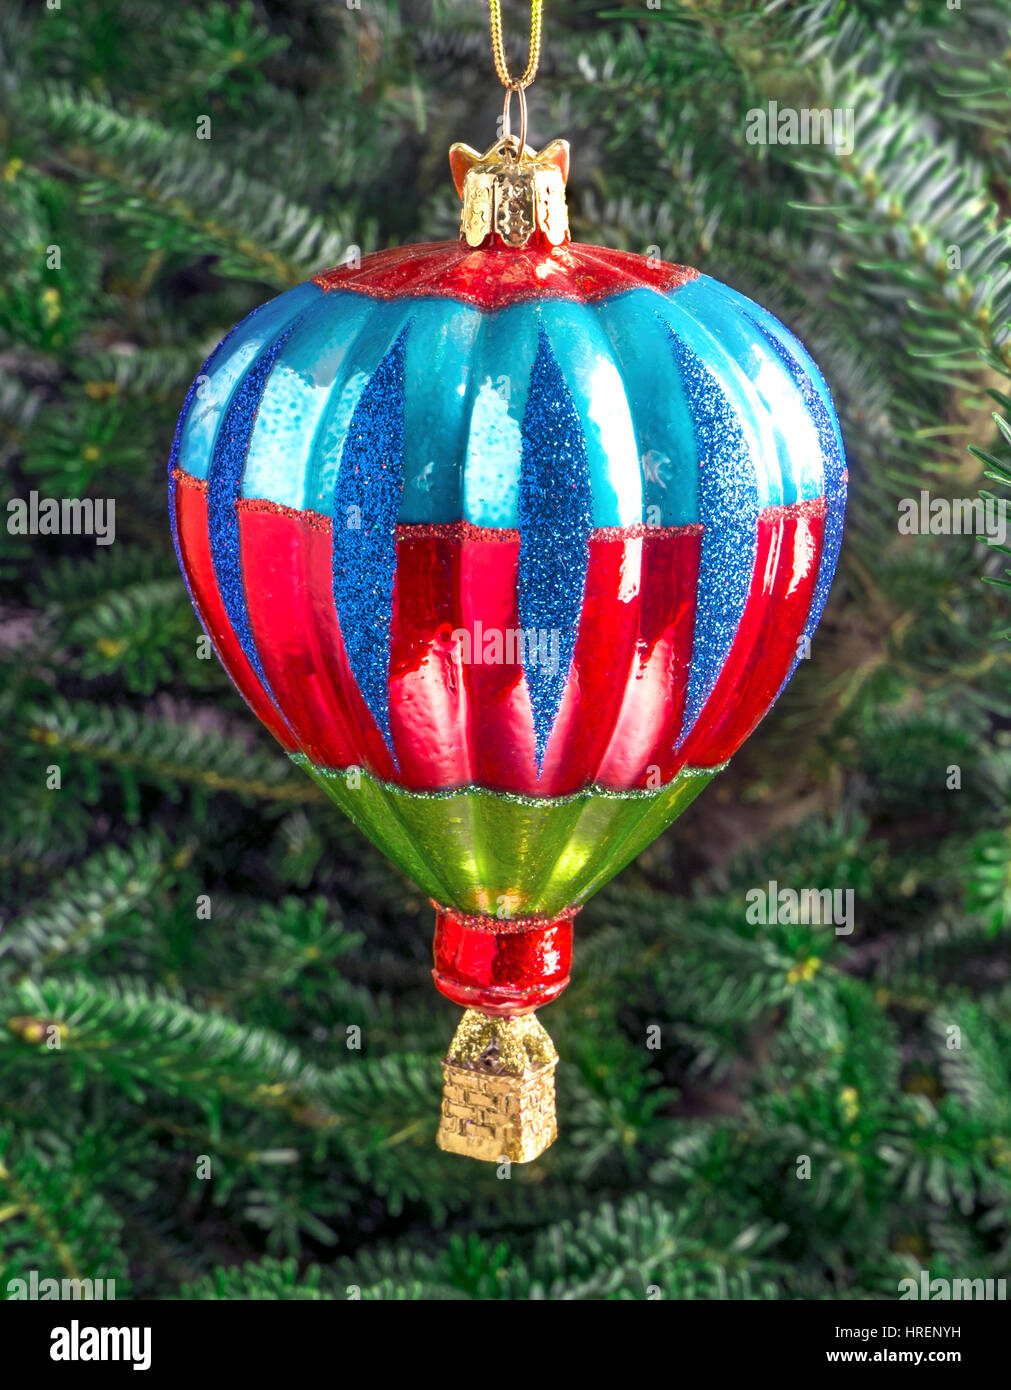 Christmas bauble hanging from a tree in the shape of a Hot Air Balloon Stock Photo